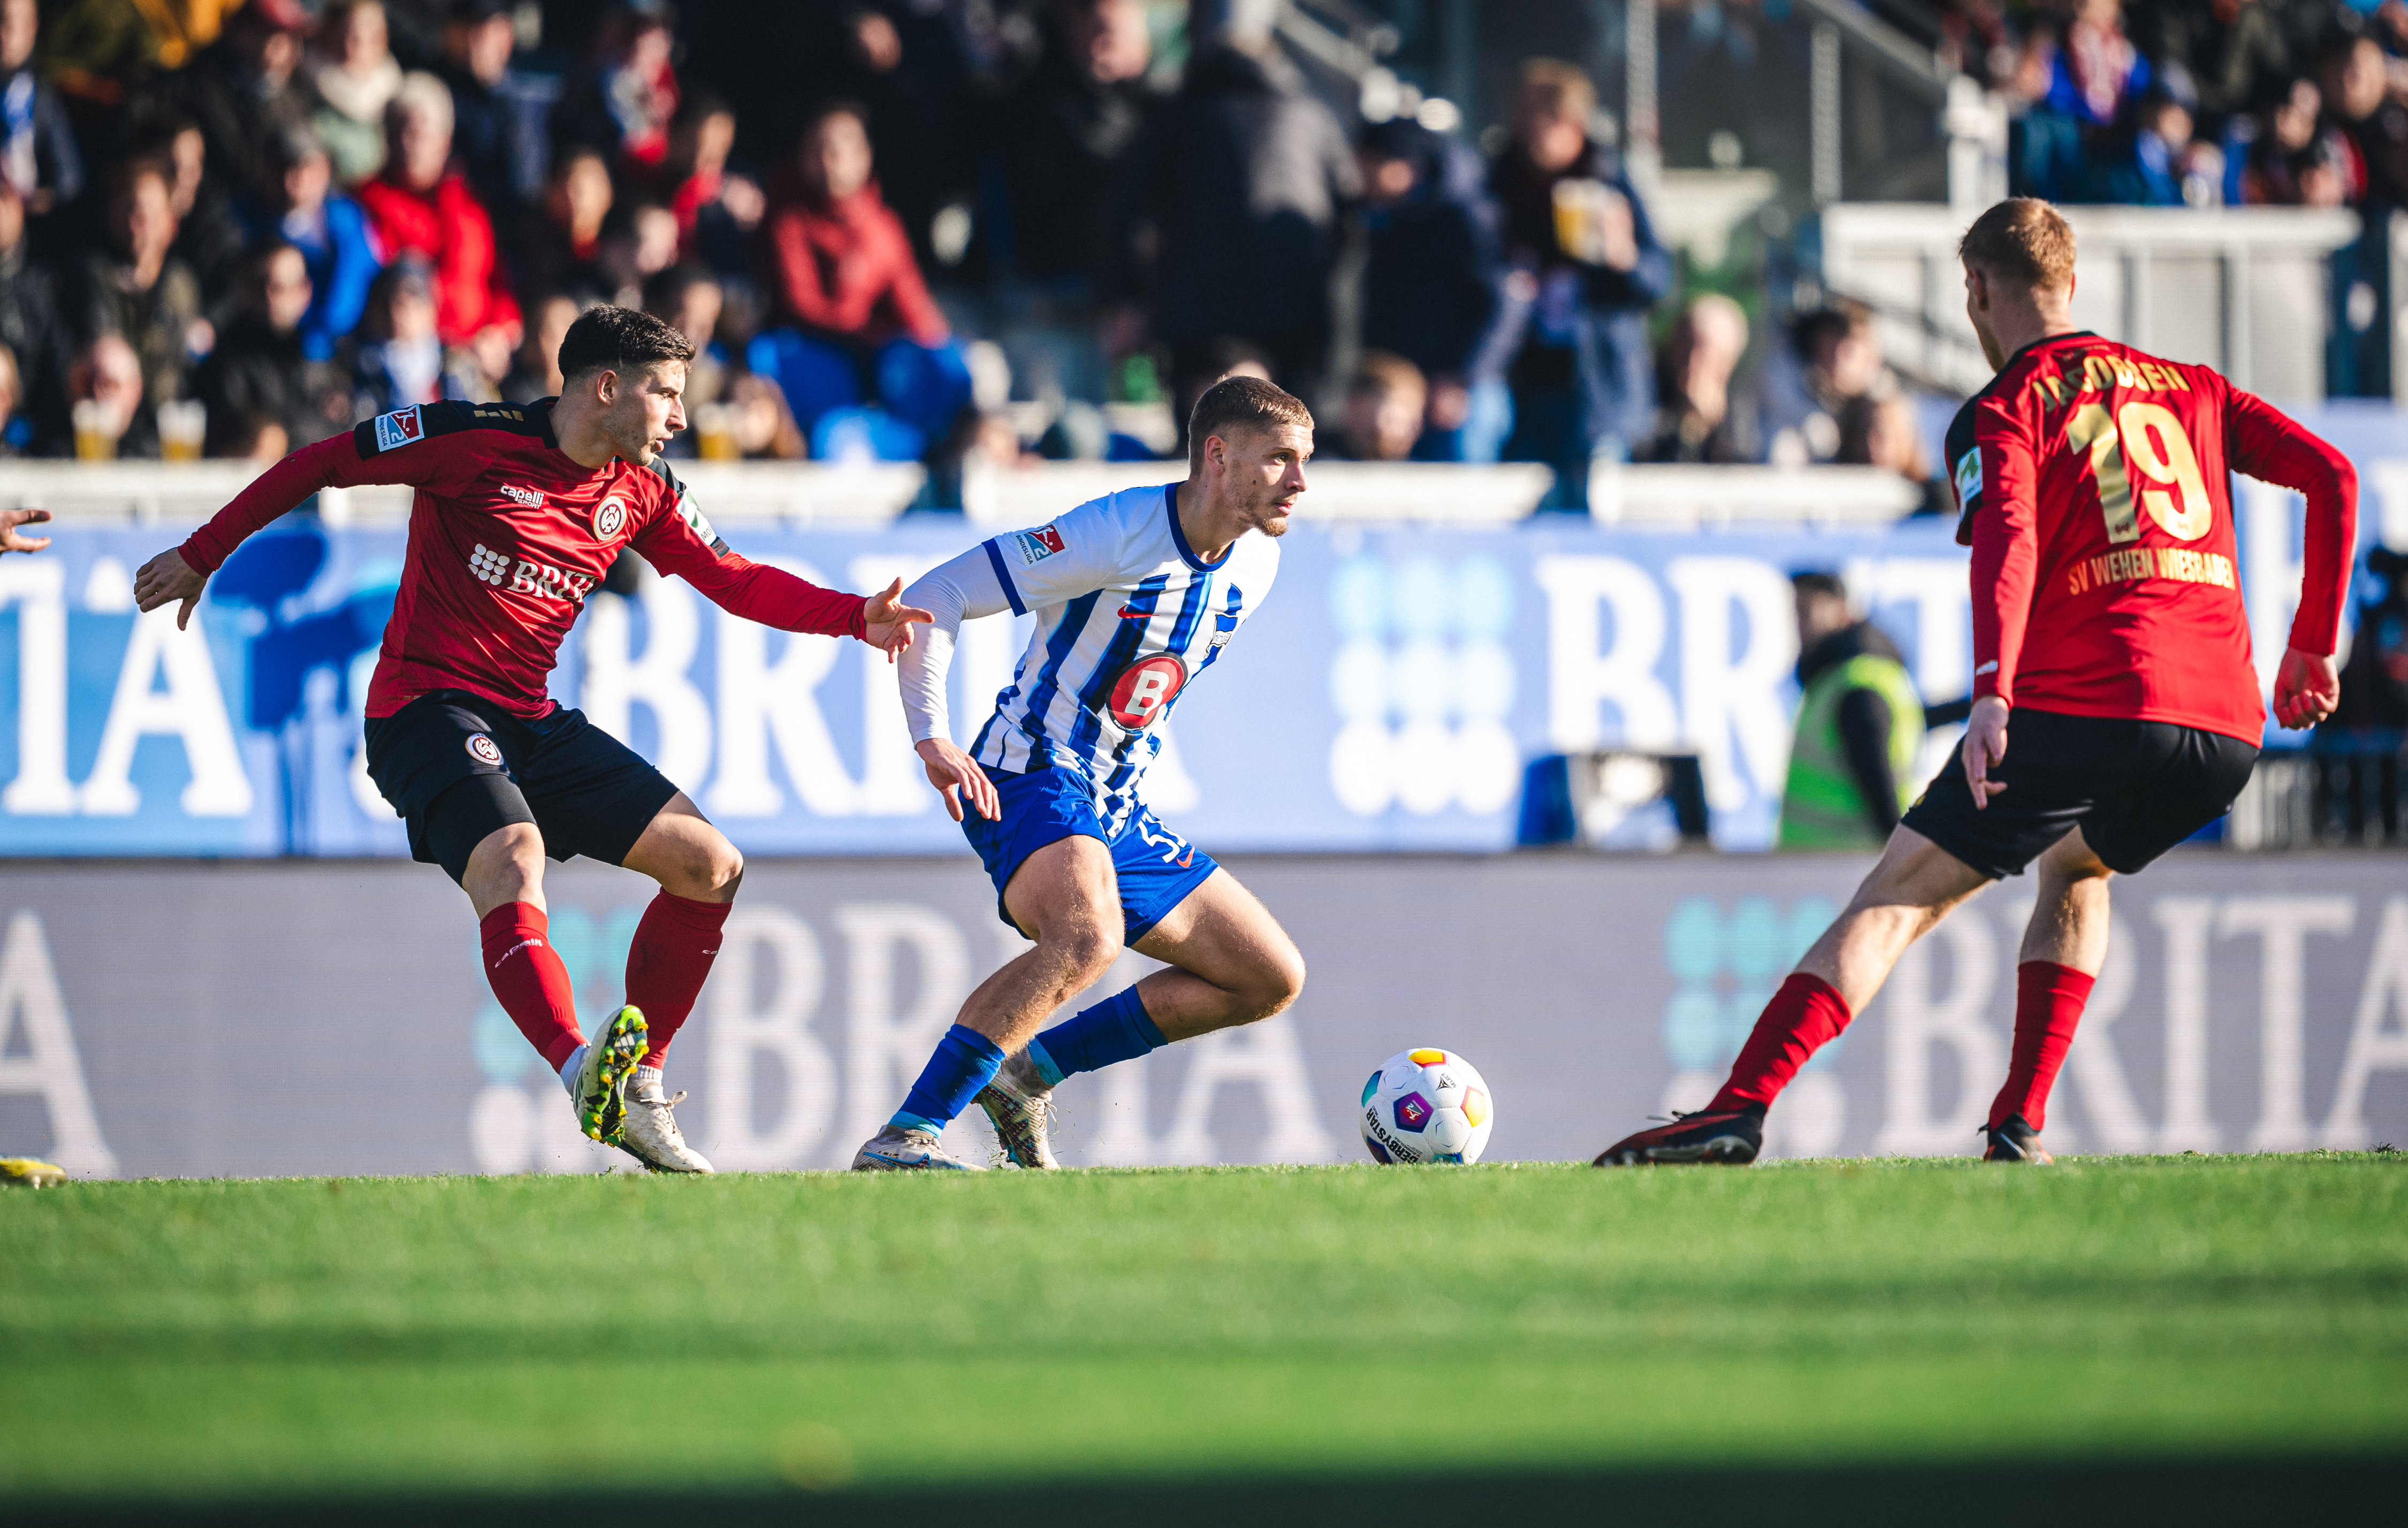 A duel in the contest between Hertha and Wiesbaden.